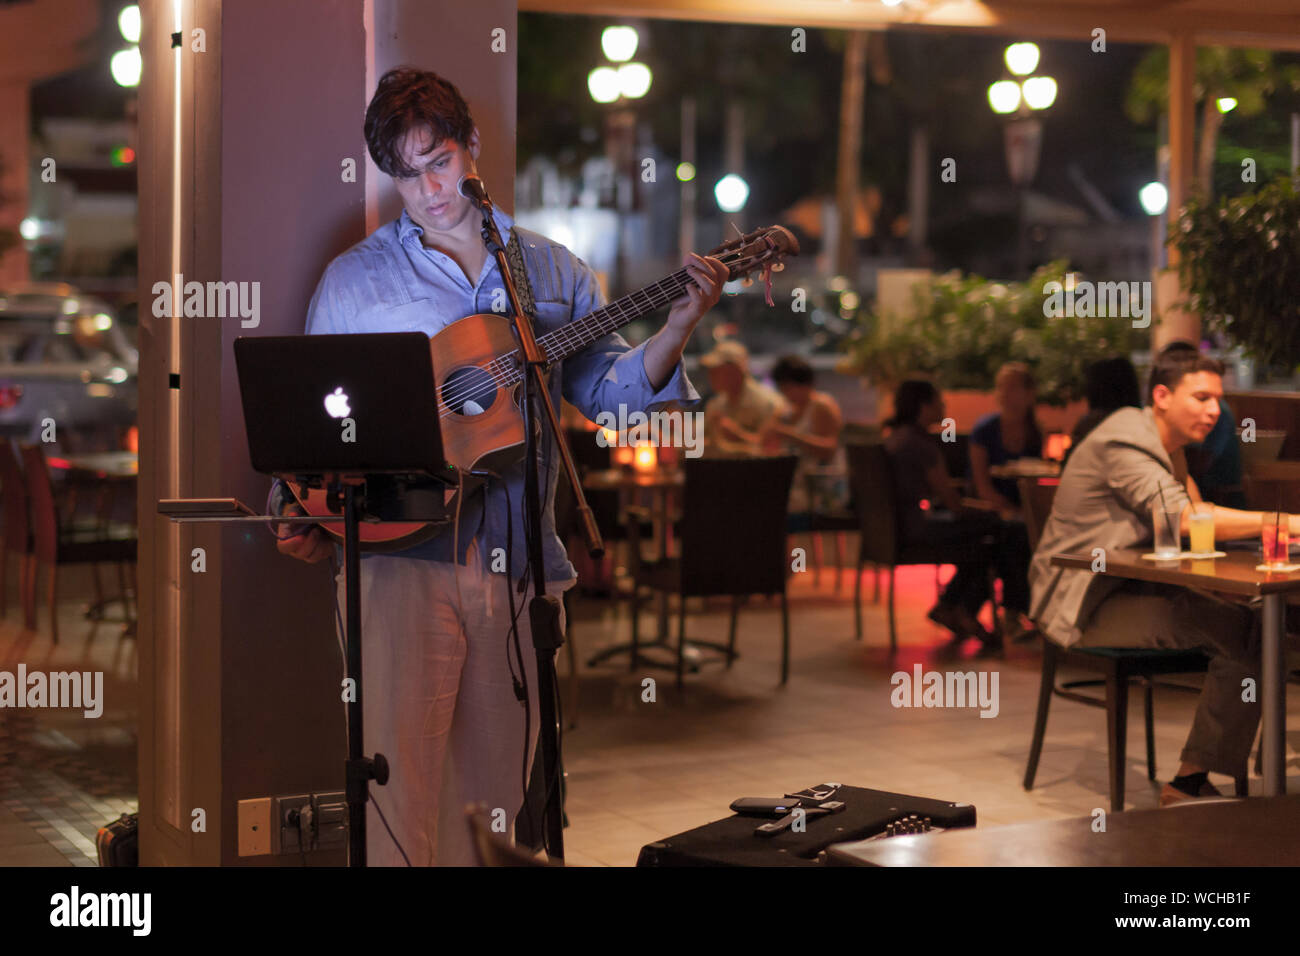 Man playing guitar in cafe Stock Photo - Alamy